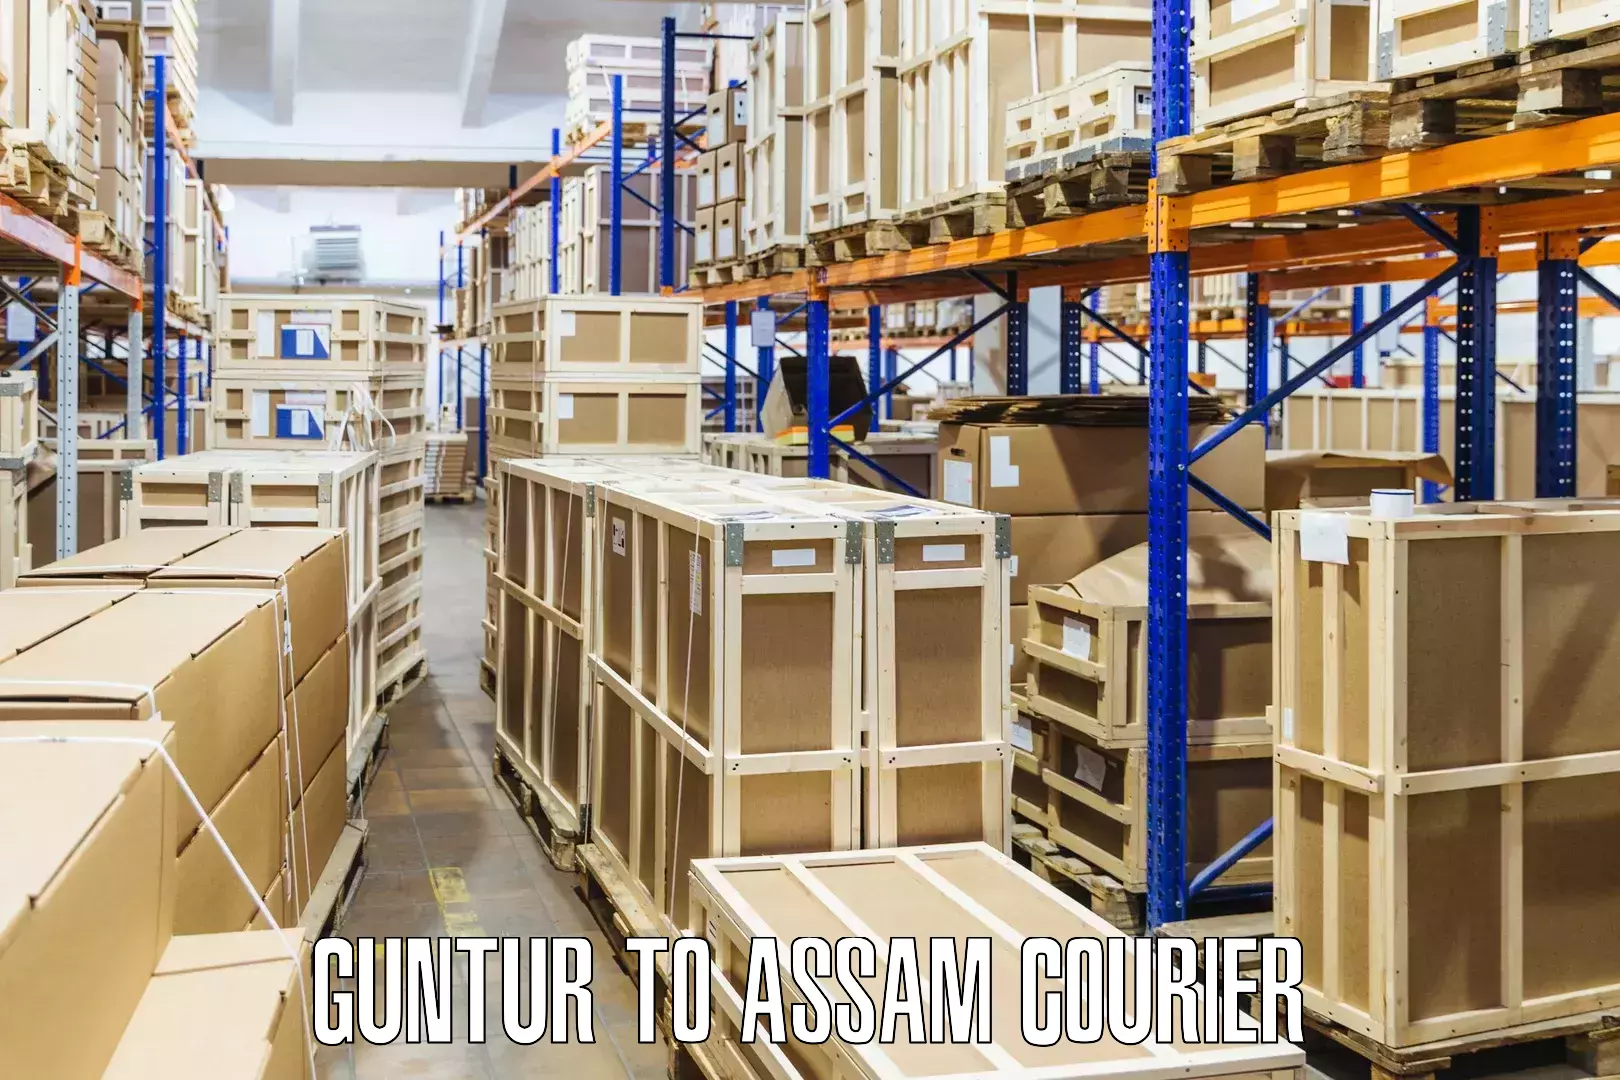 Package delivery network Guntur to Assam